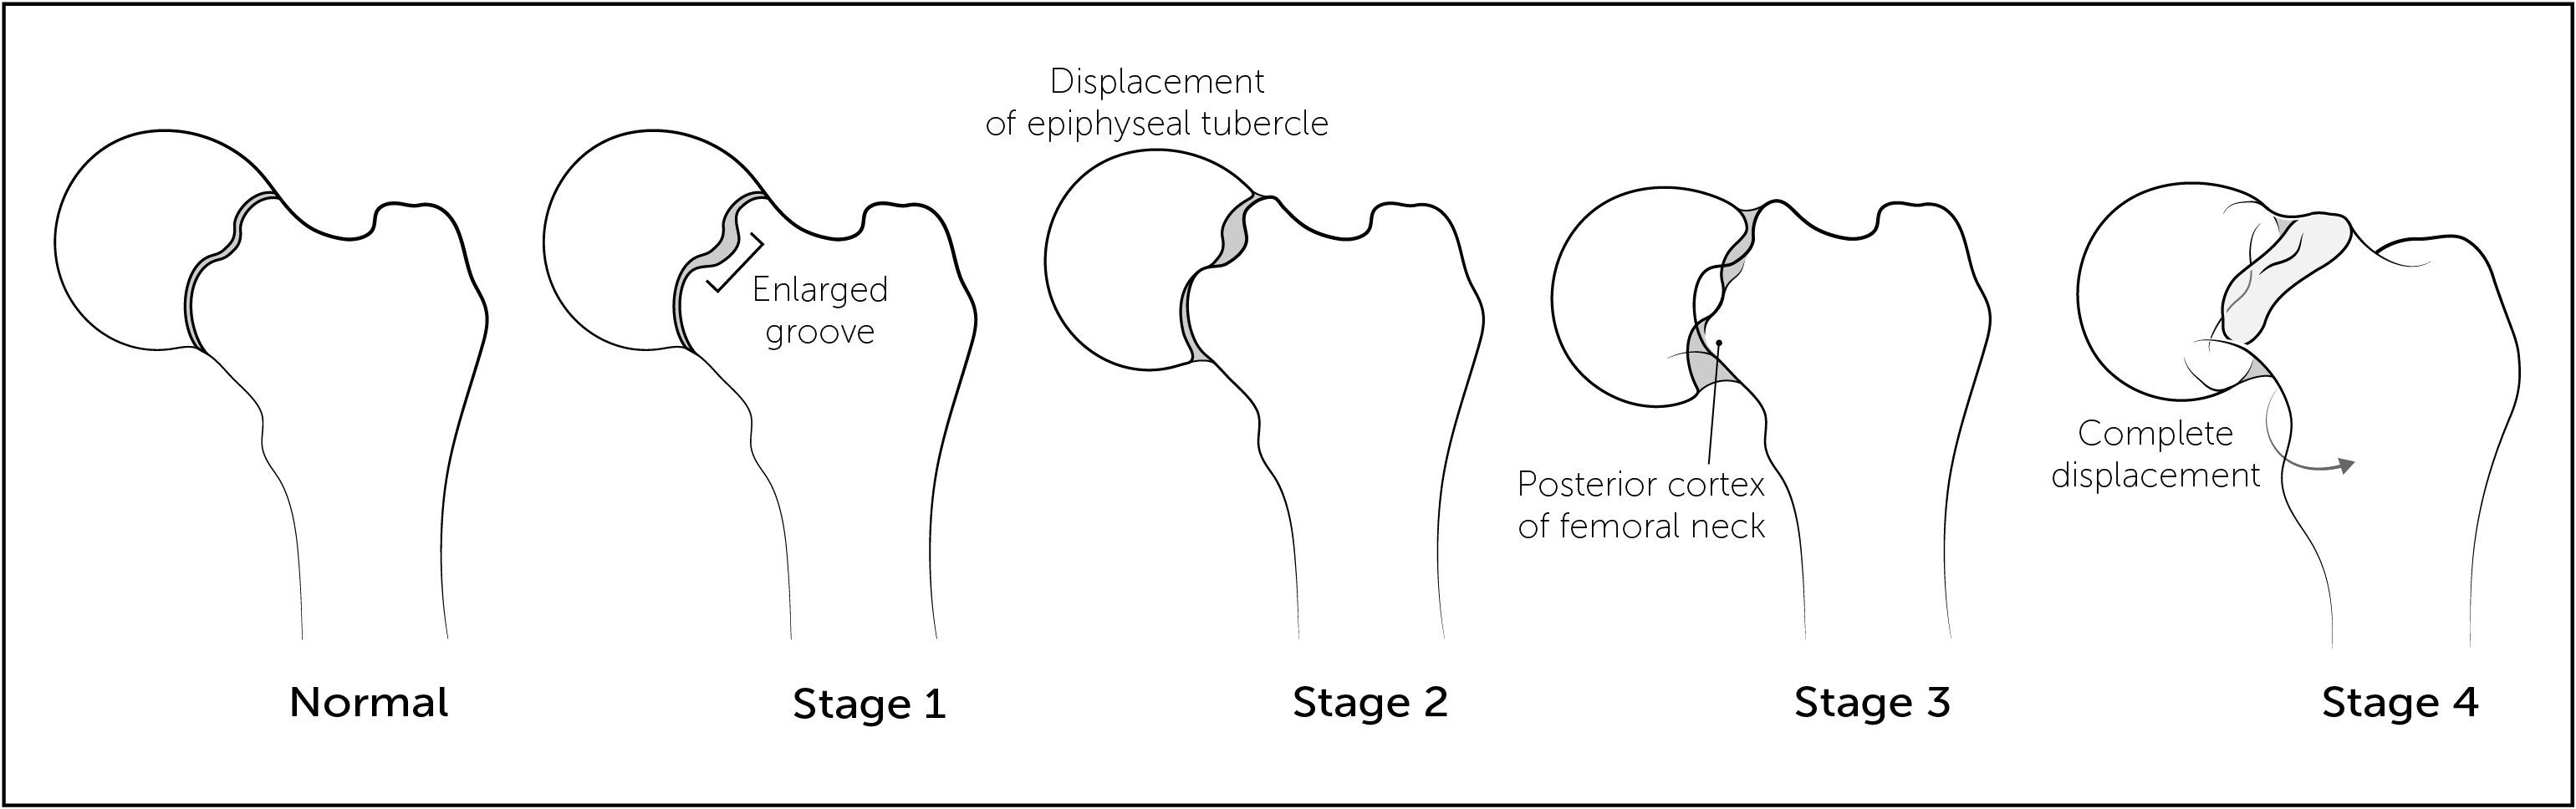 Proposed new SCFE classification based on the relationship of the tubercle and its metaphyseal socket.